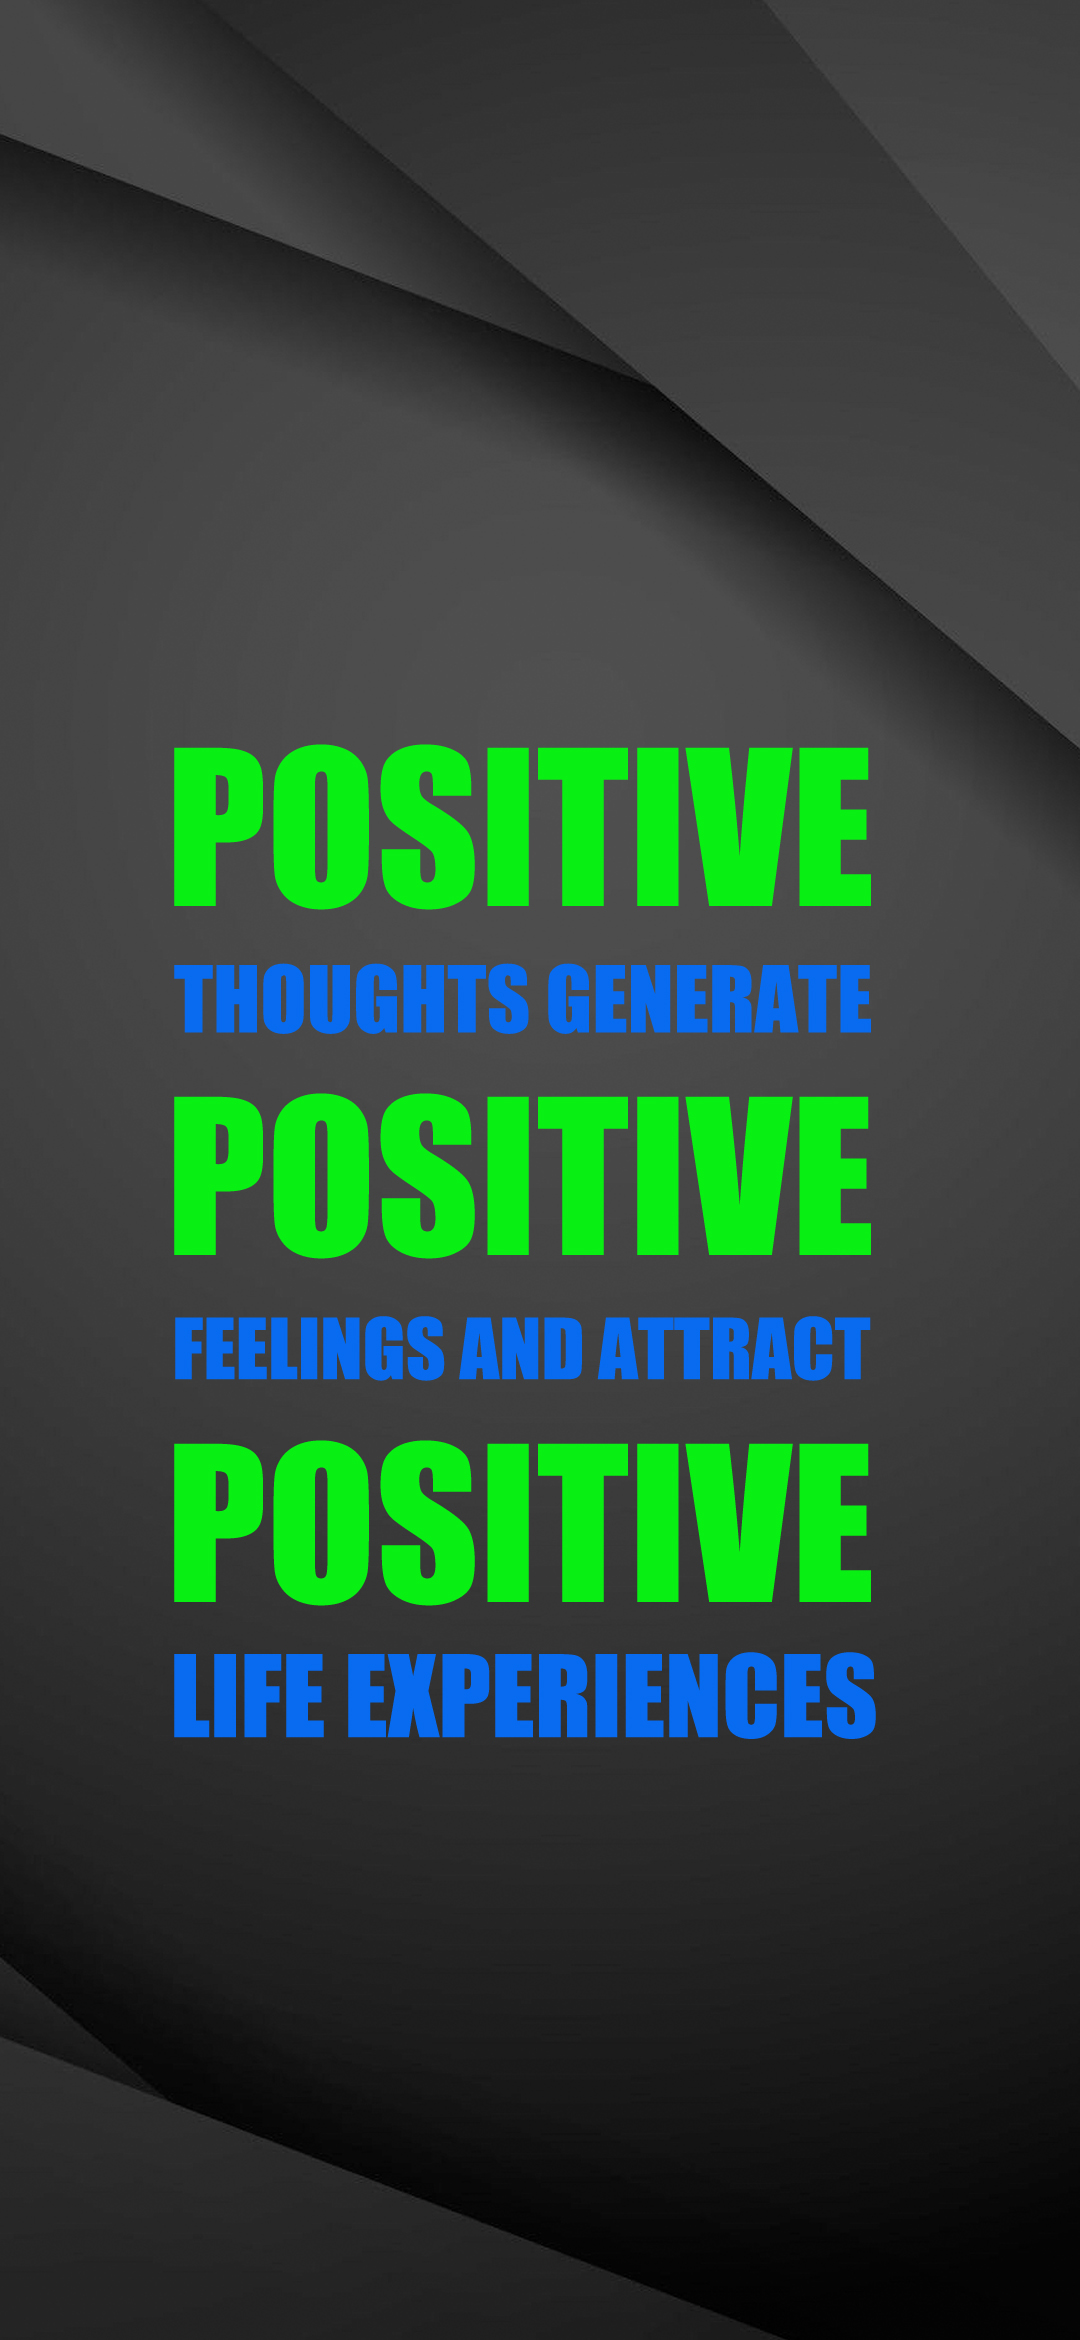 Positive Thinking Wallpaper for Mobile Phones Screen with Dark Background Wallpaper. Wallpaper Download. High Resolution Wallpaper